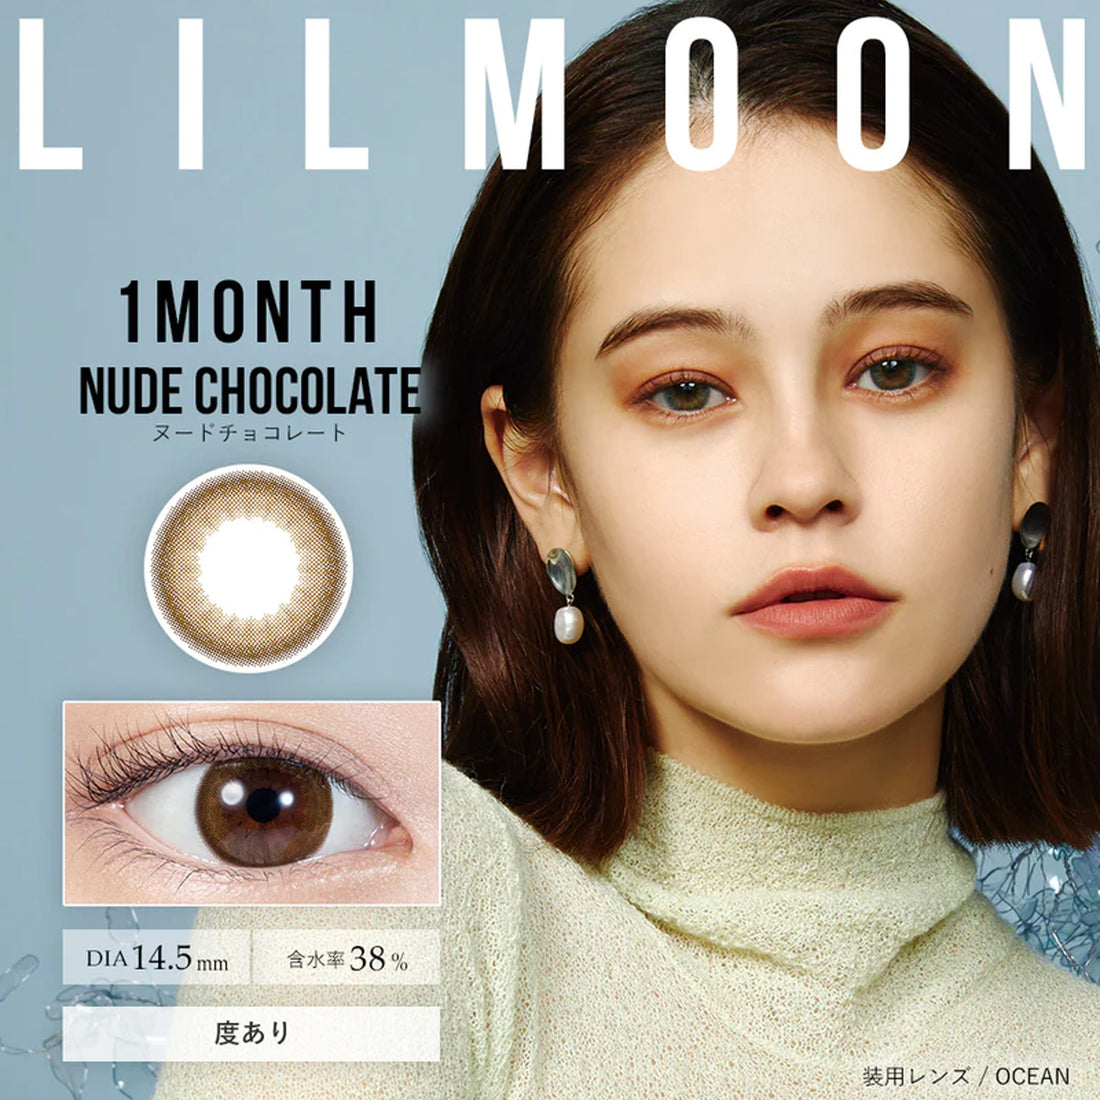 LIL MOON Monthly Contact Lenses-Nude Chocolate 1lens